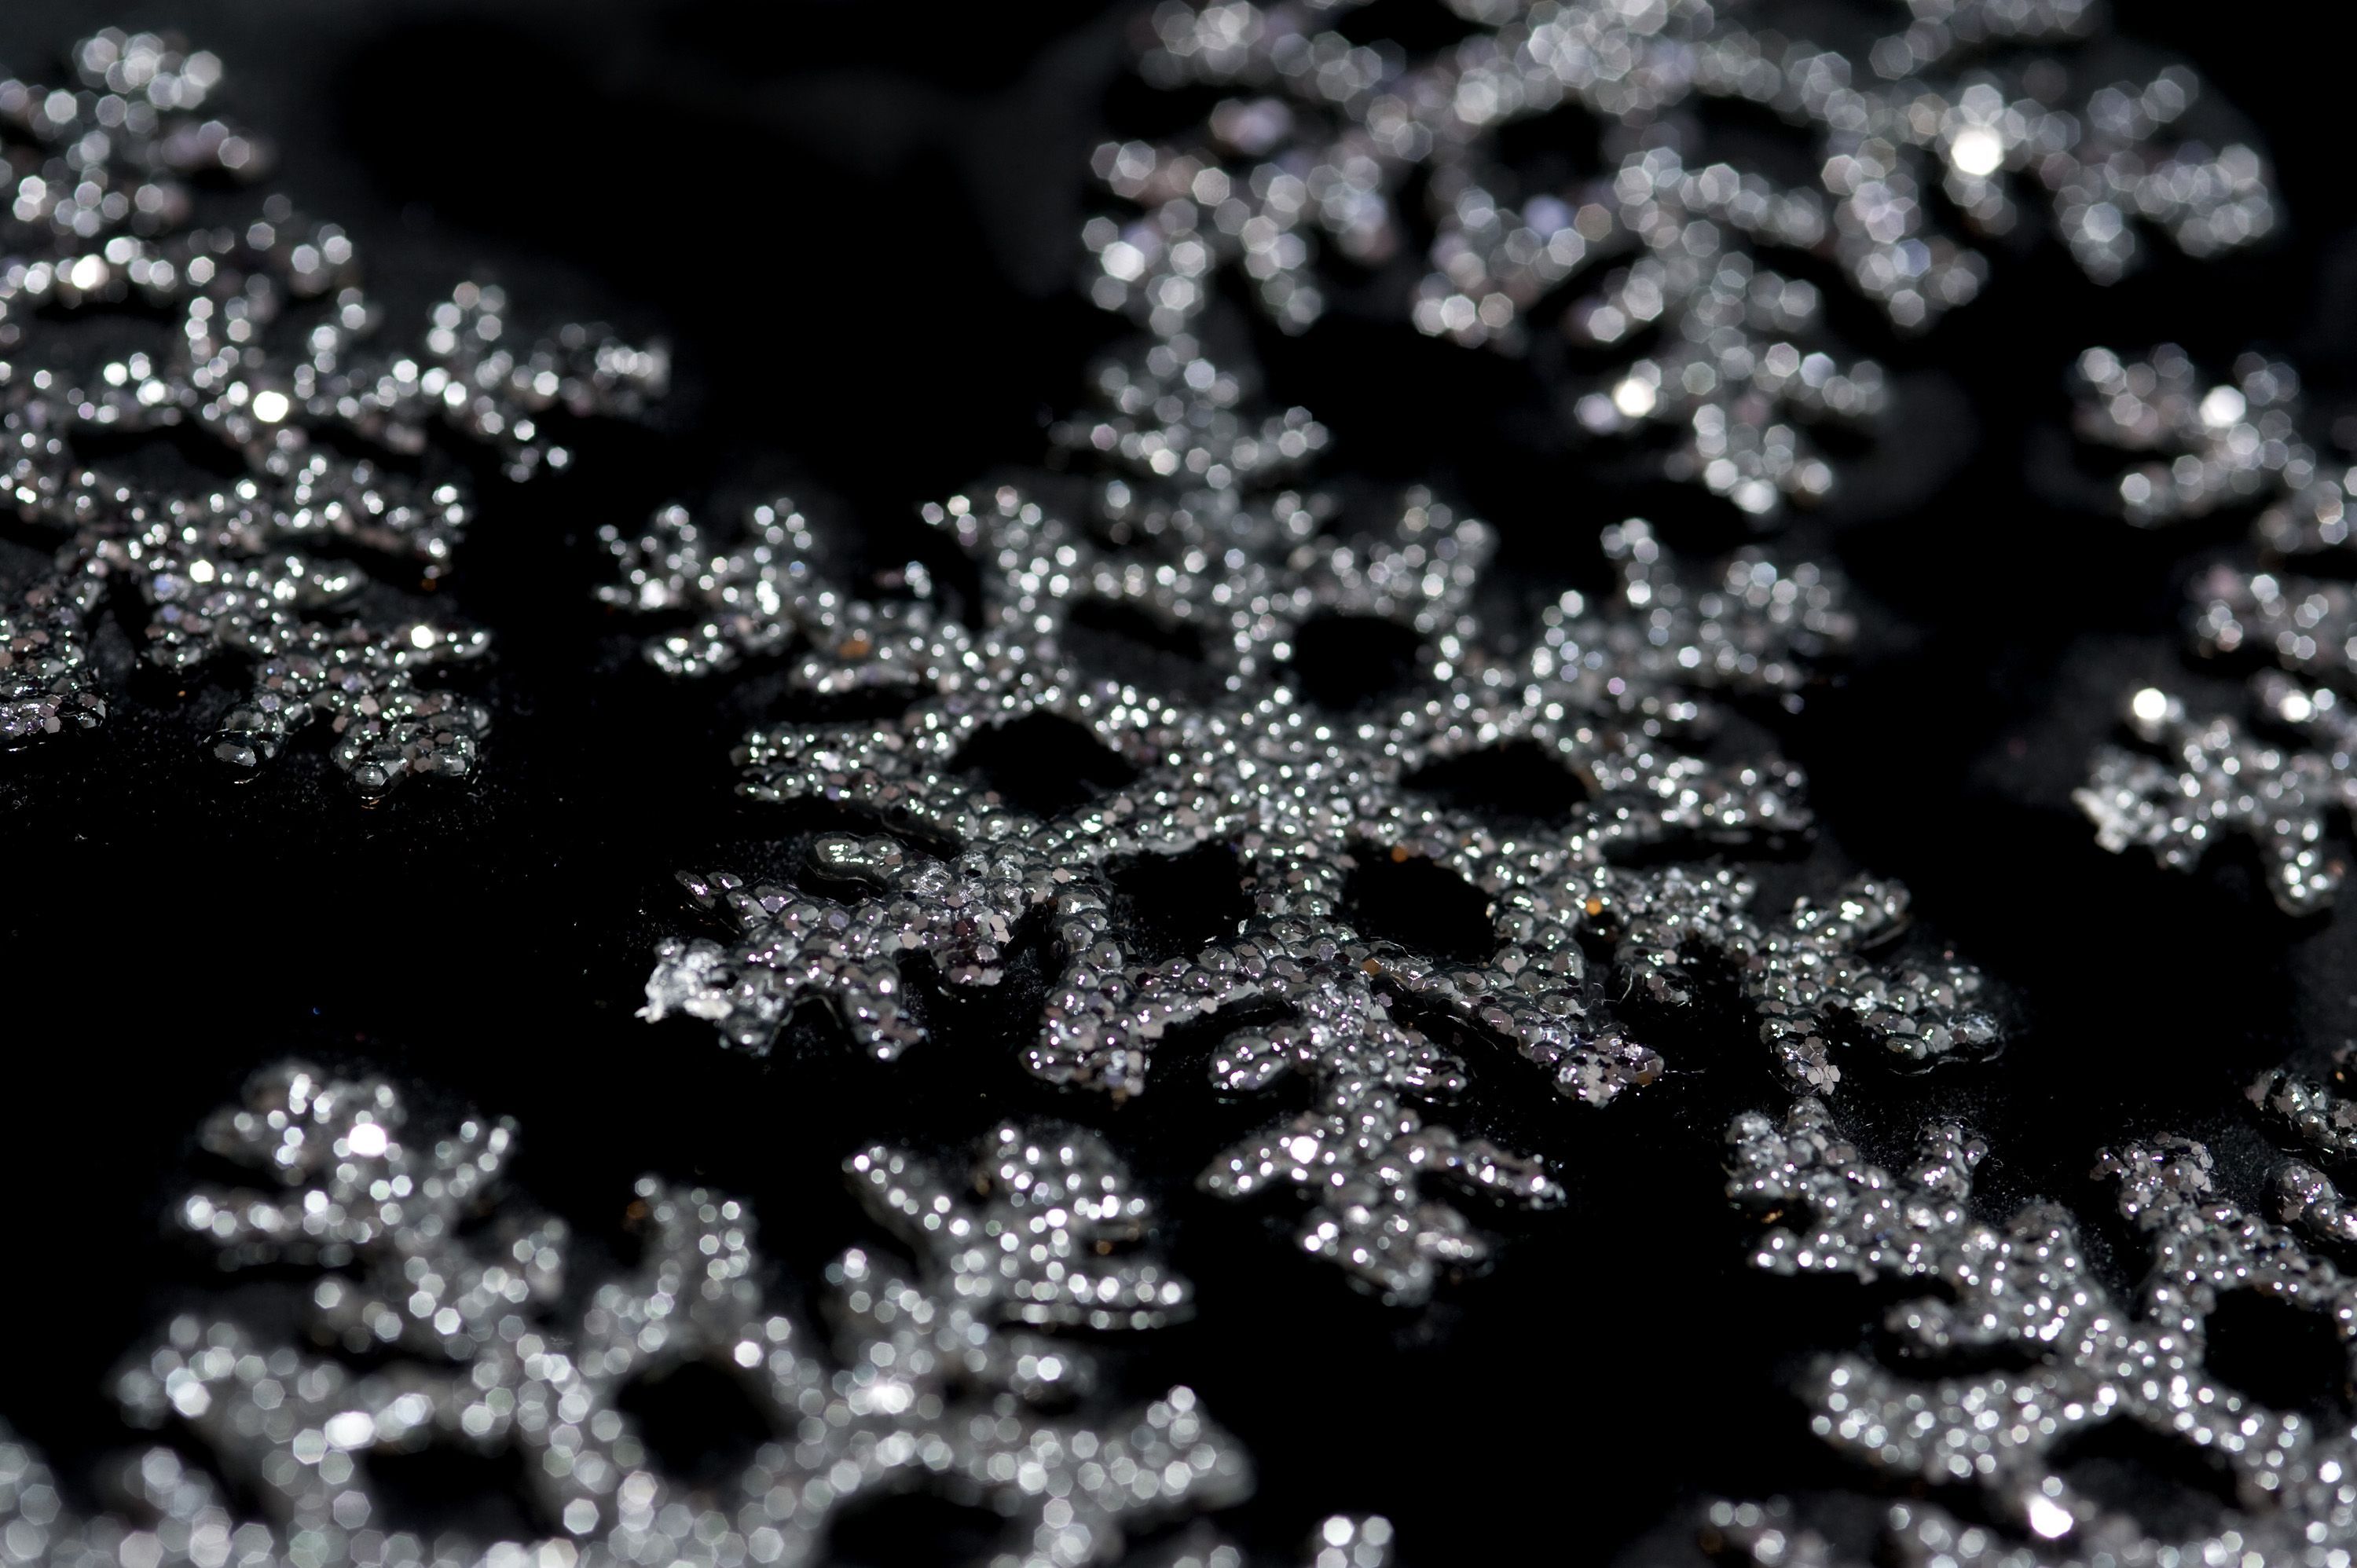 A close up of some silver snowflakes - Snowflake